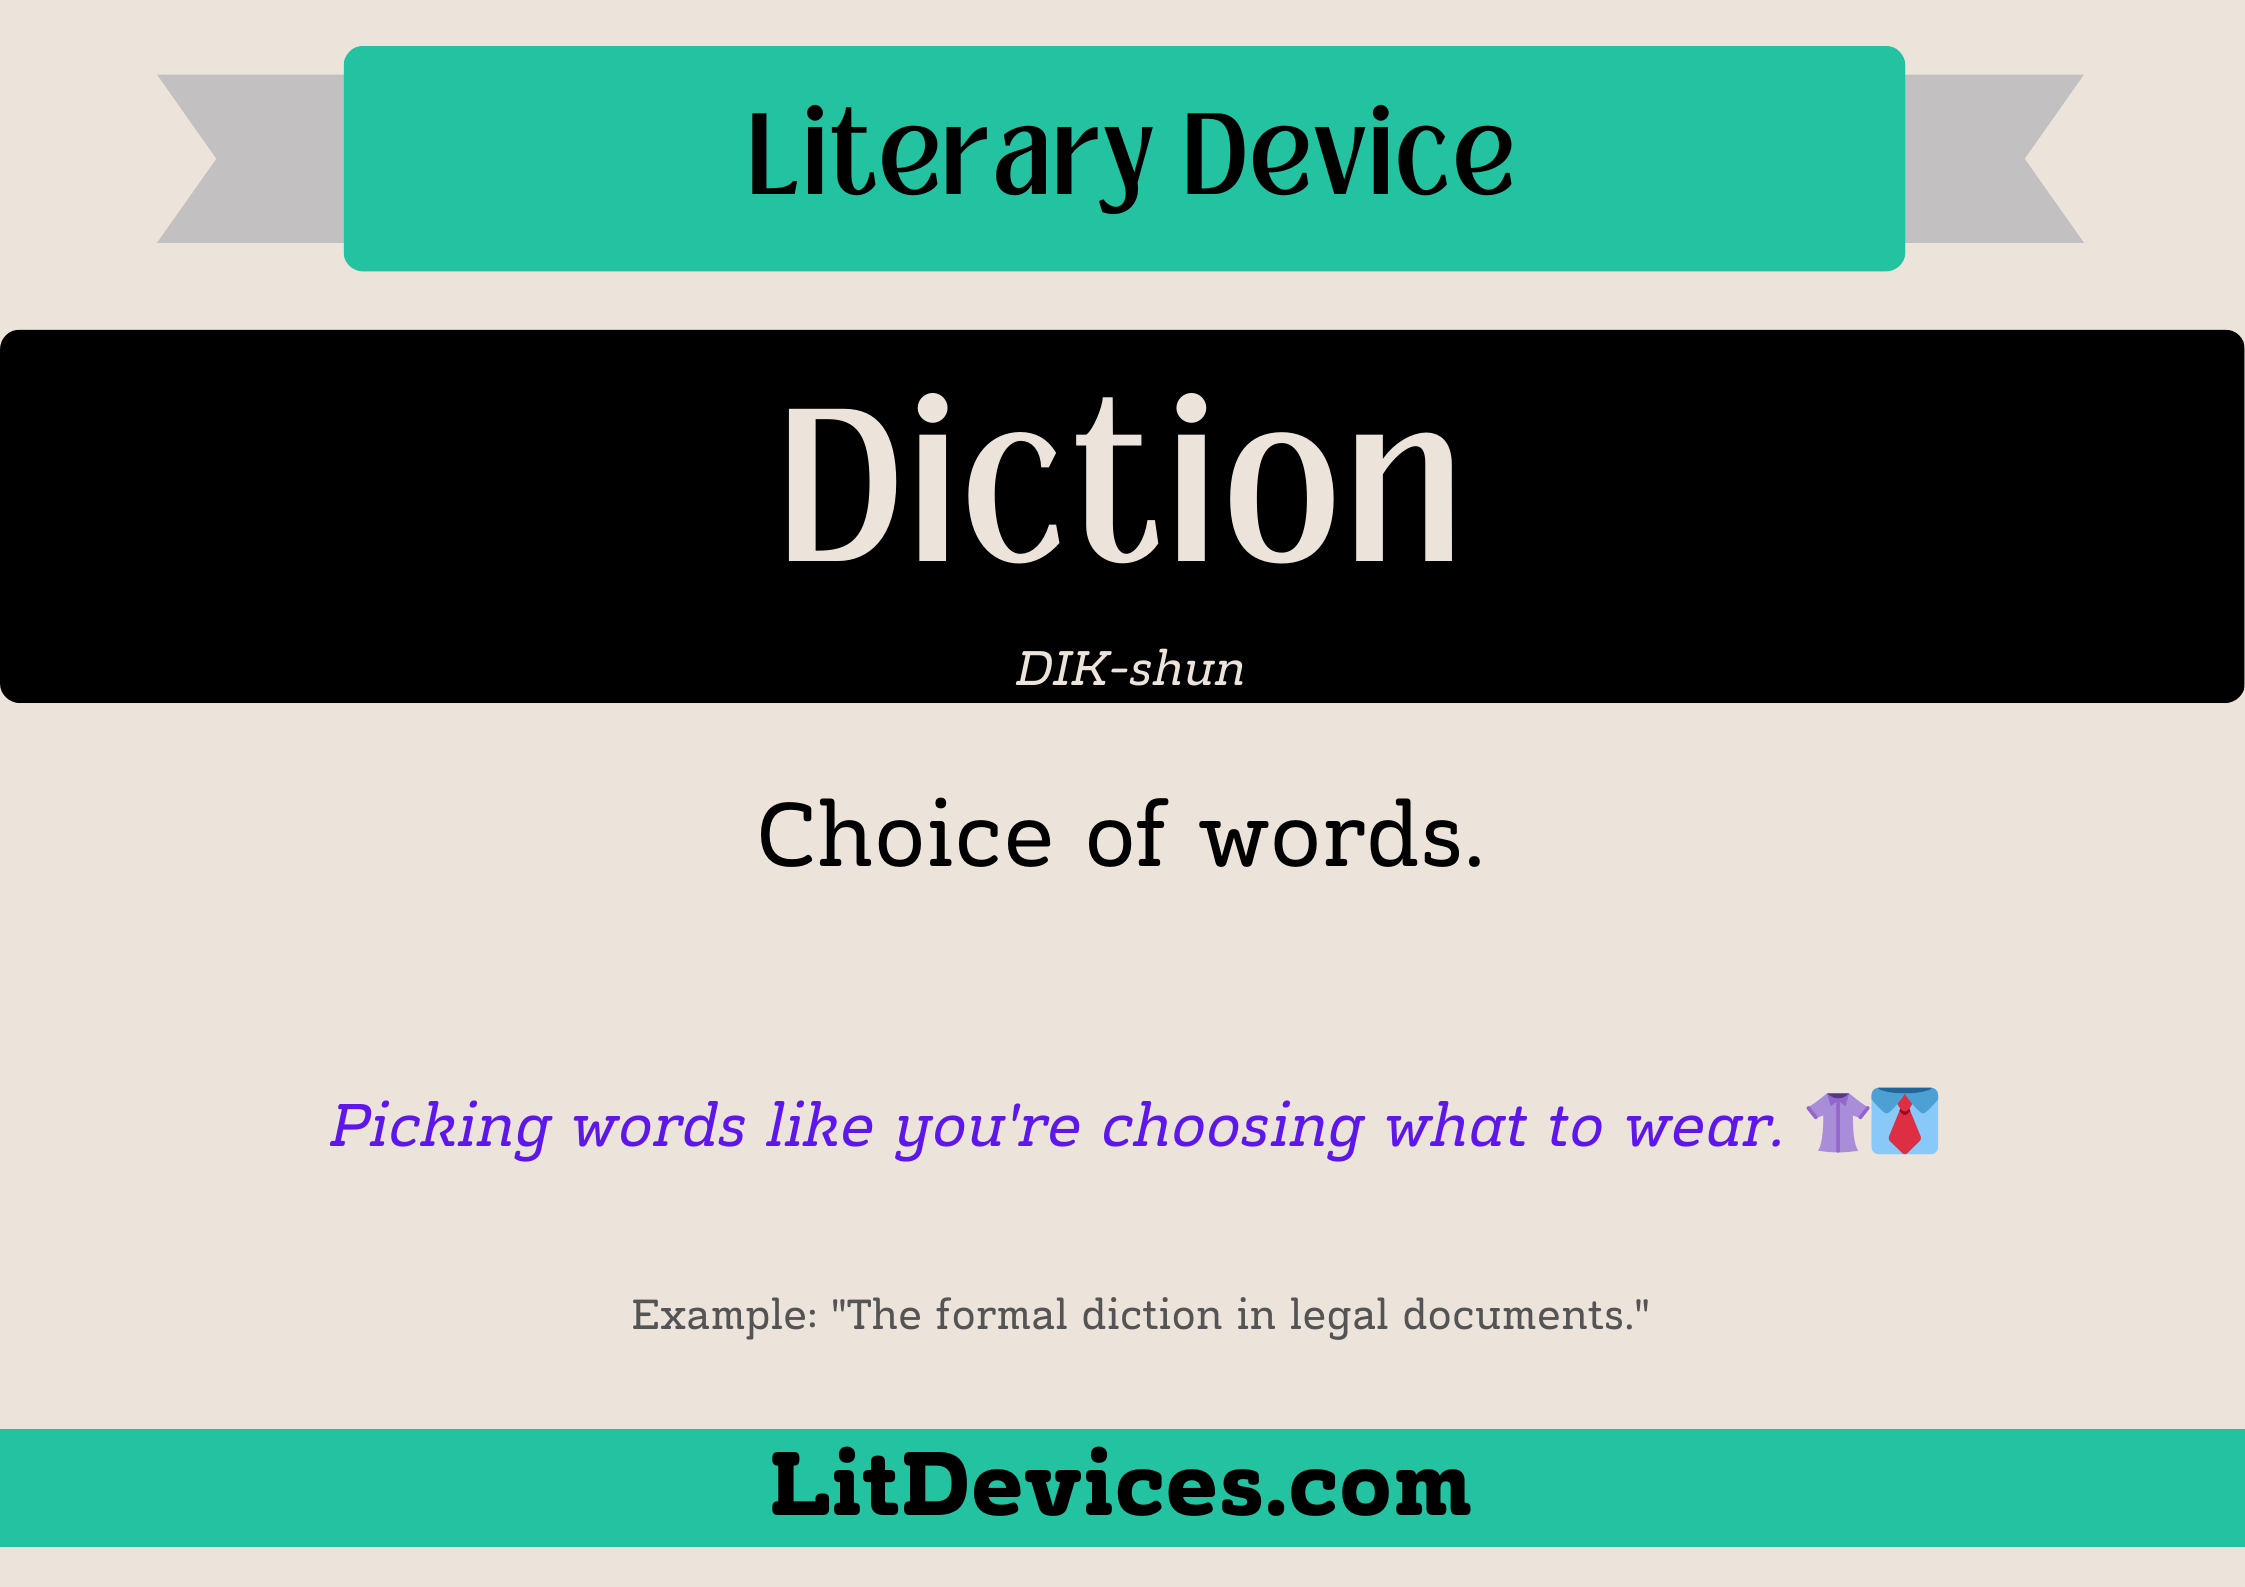 diction literary device